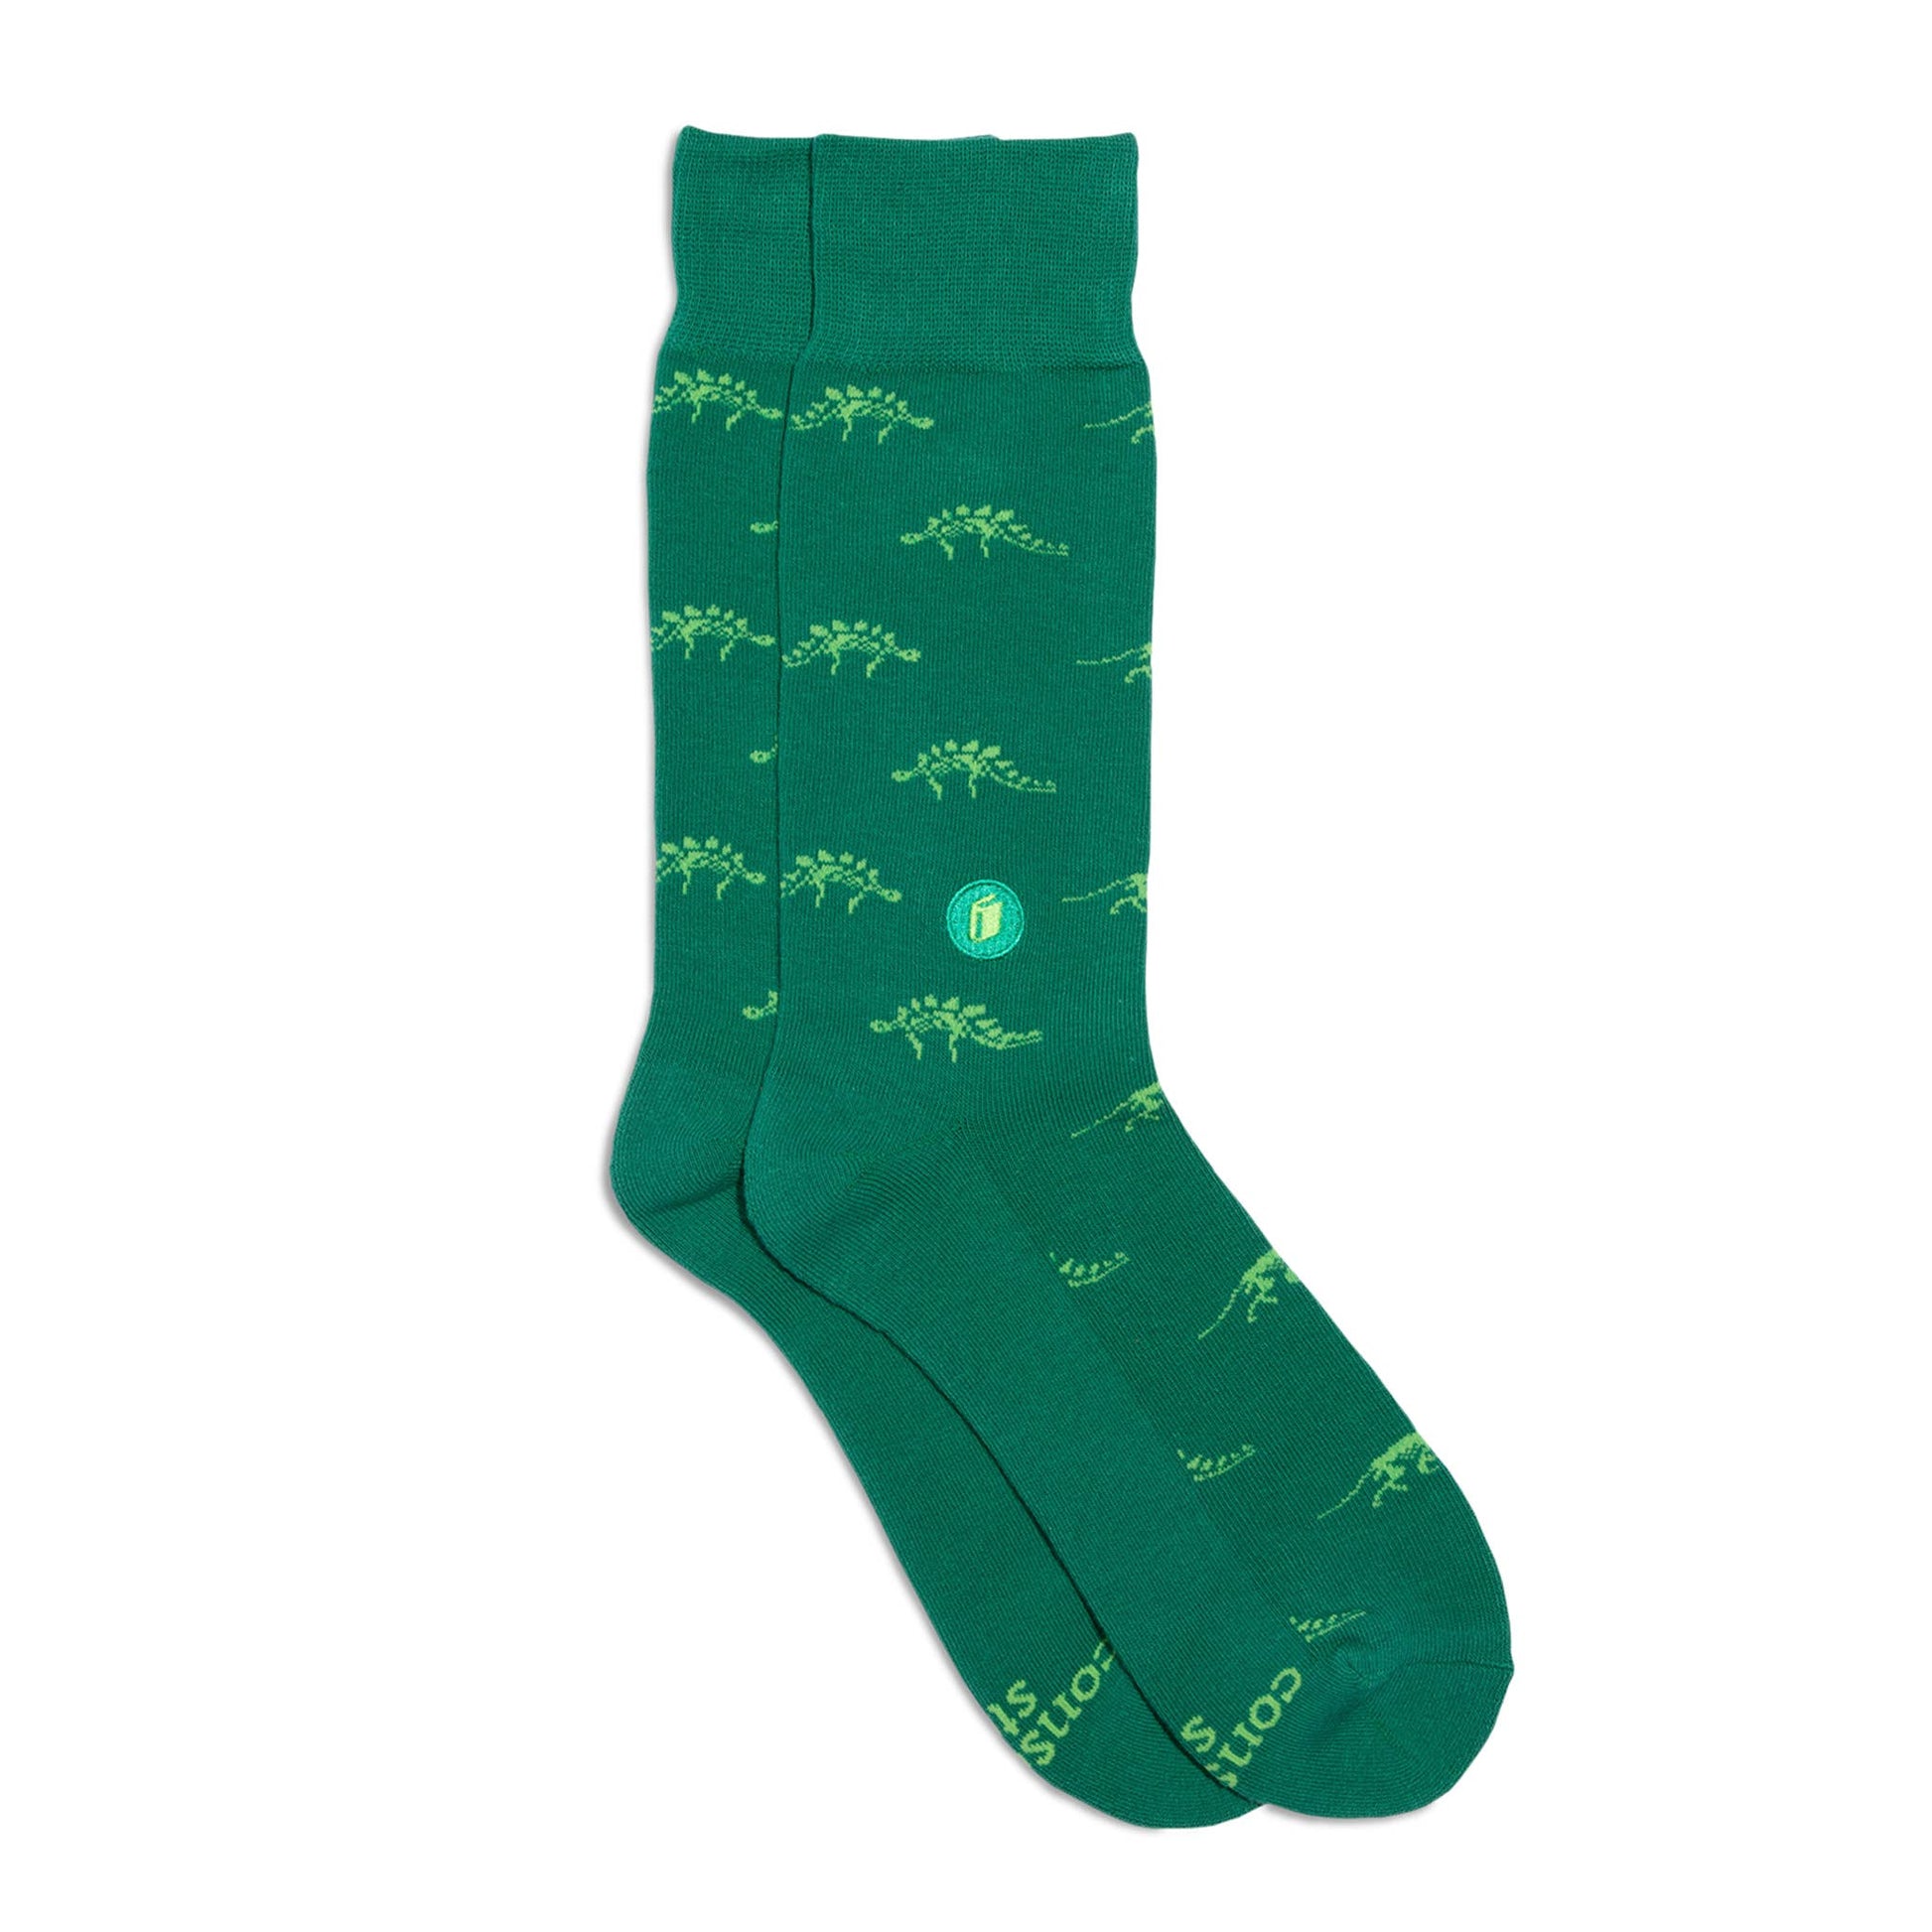 Conscious Step - Socks that Give Books  (Green Dinosaurs)  Conscious Step Small  -better made easy-eco-friendly-sustainable-gifting